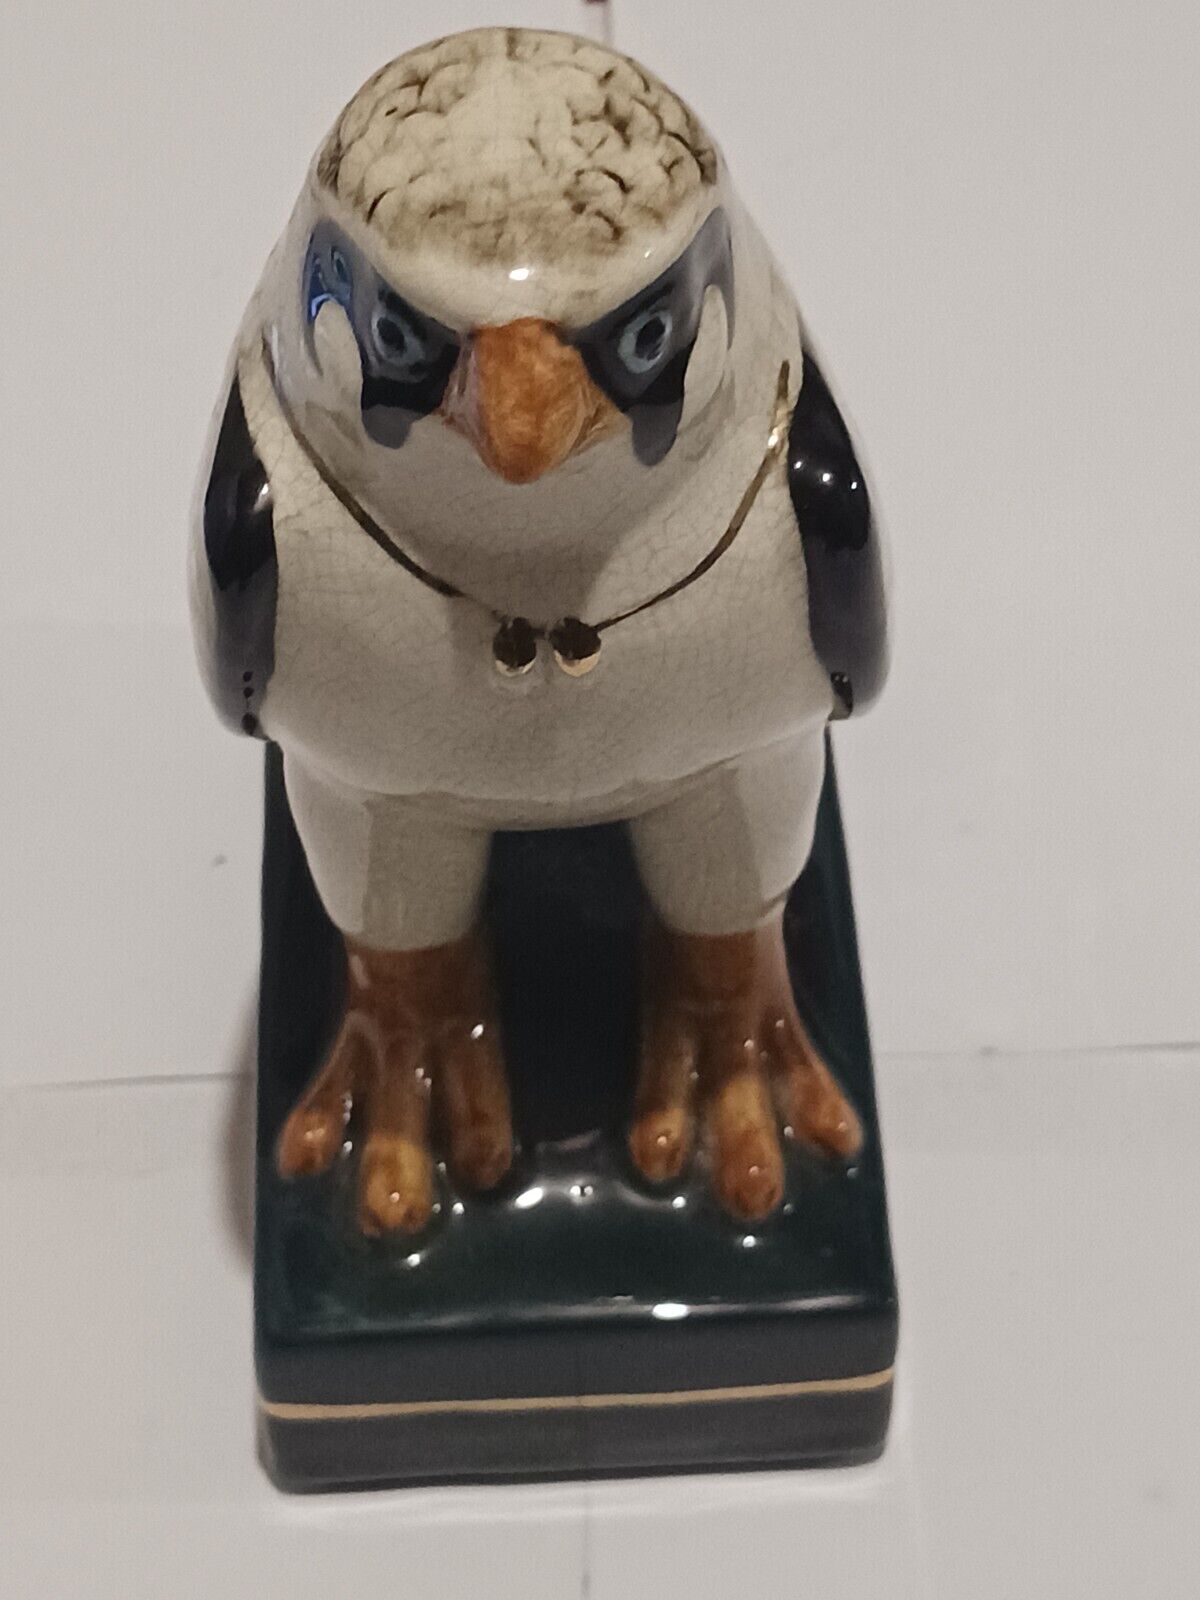 vintage mid 20th century porcelain falcon figurine manufactured by Takahashi